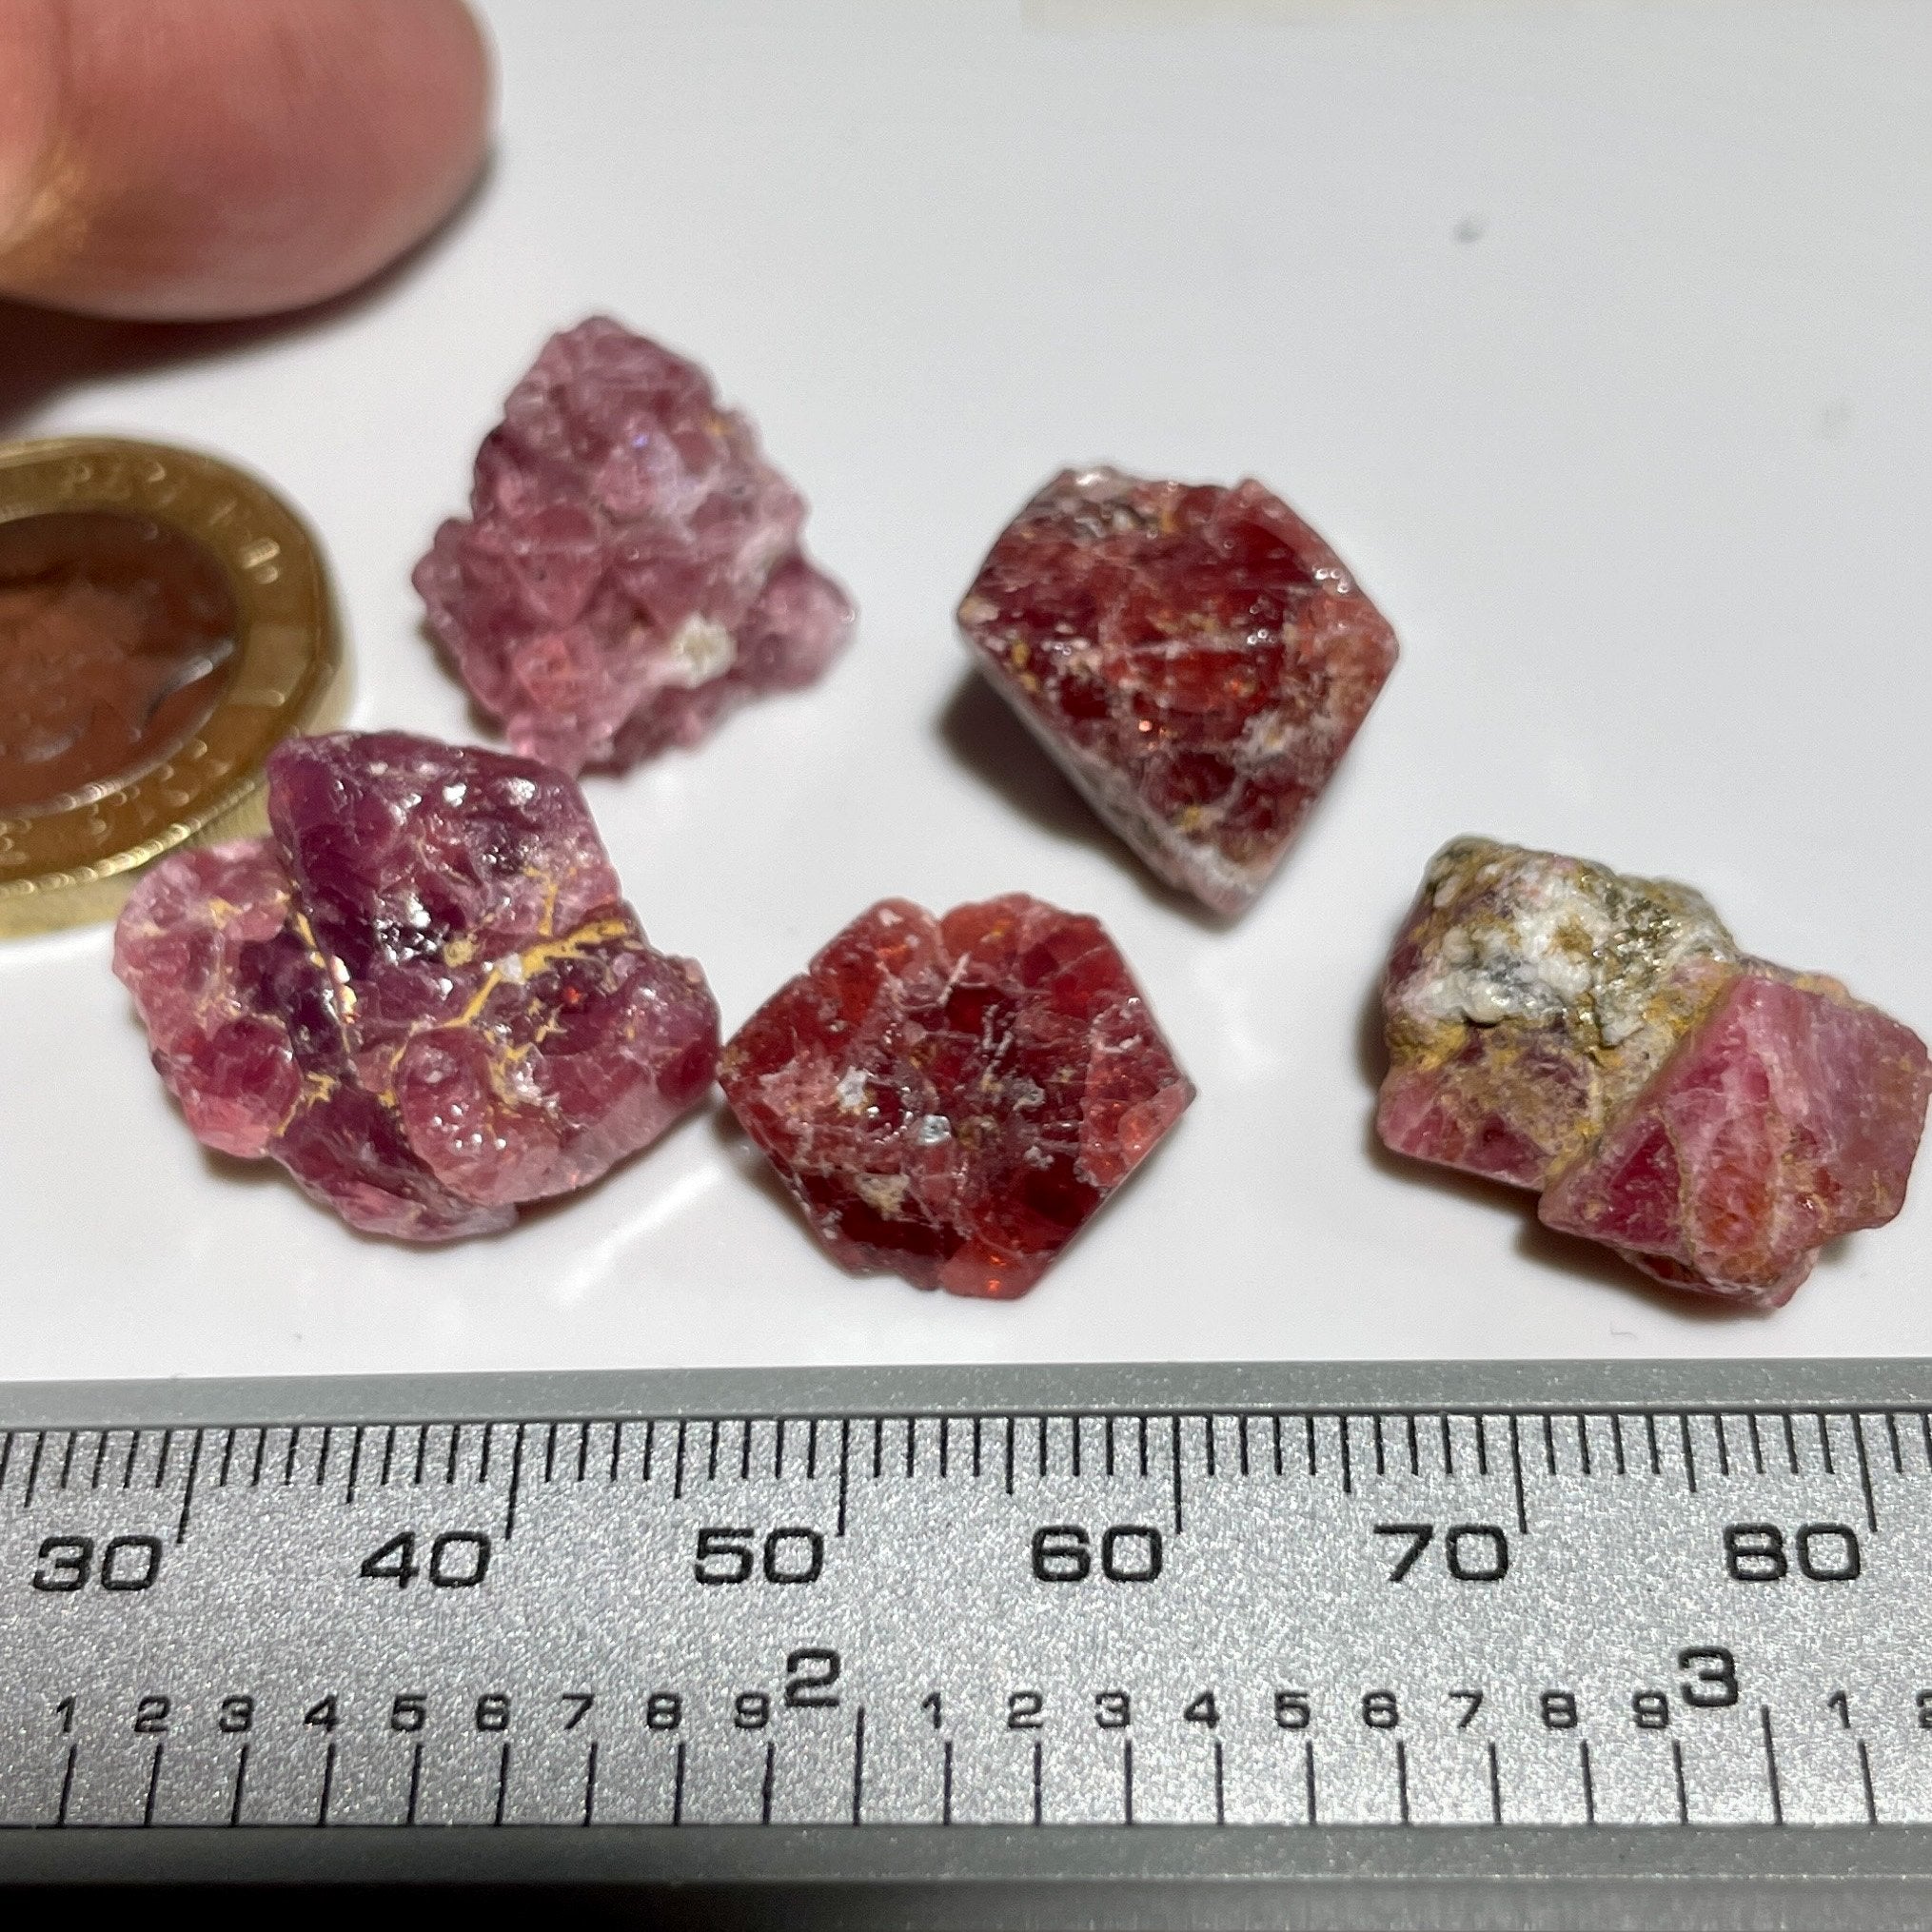 106.35Ct Mahenge Spinel Crystal Lot 12.87Ct - 25.33Ct Tanzania. Untreated Unheated. Good For Setting